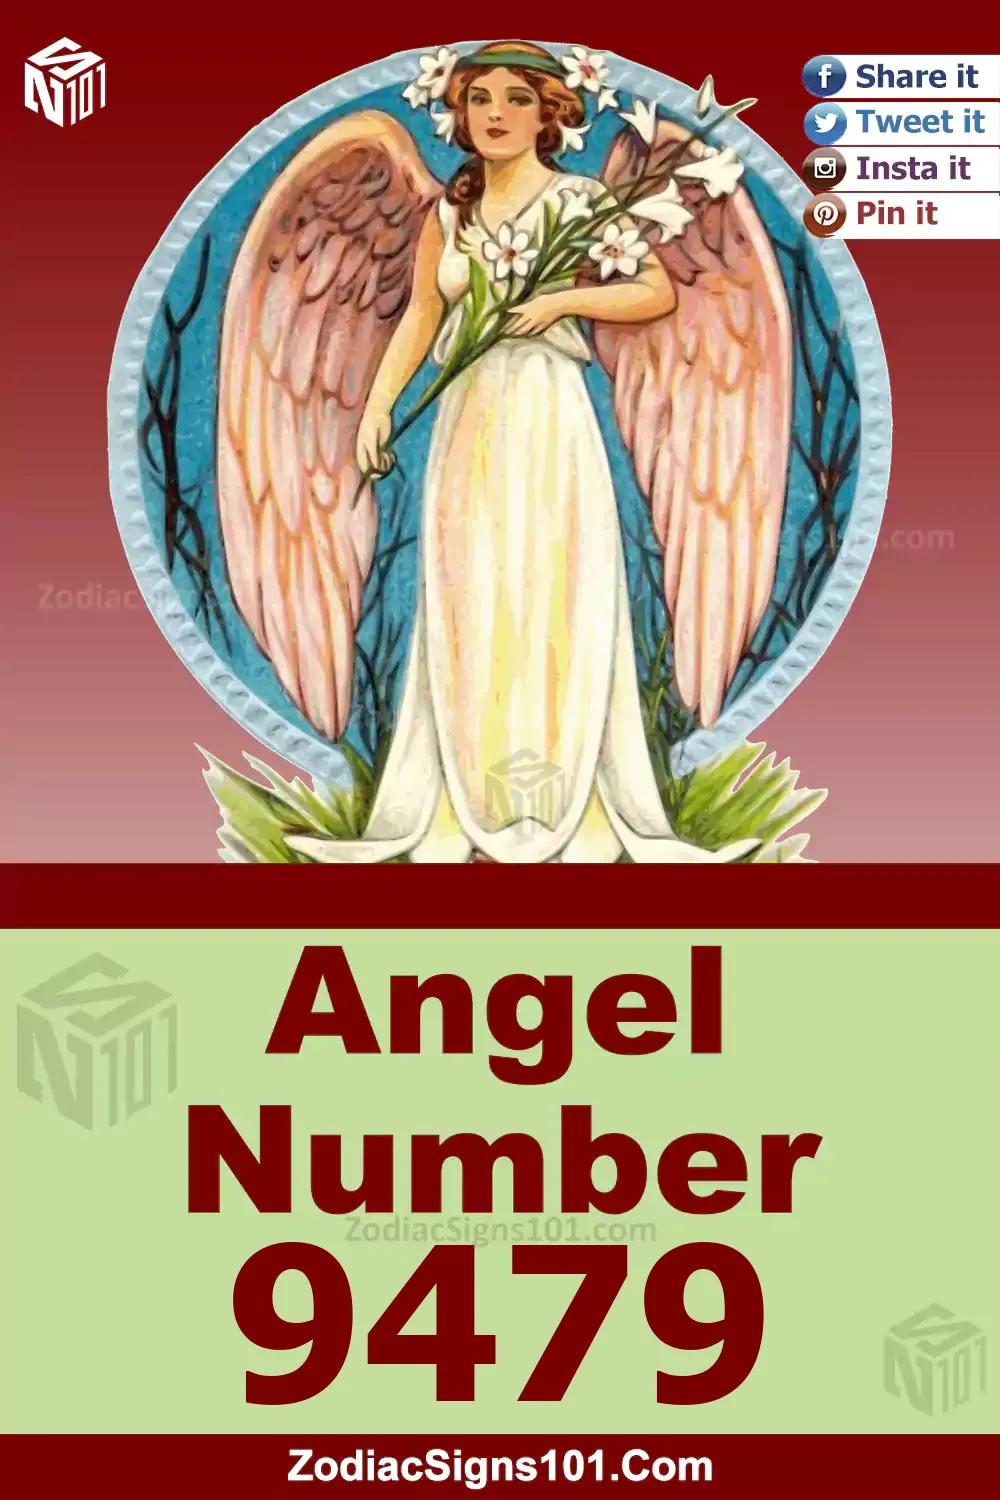 9479 Angel Number Meaning